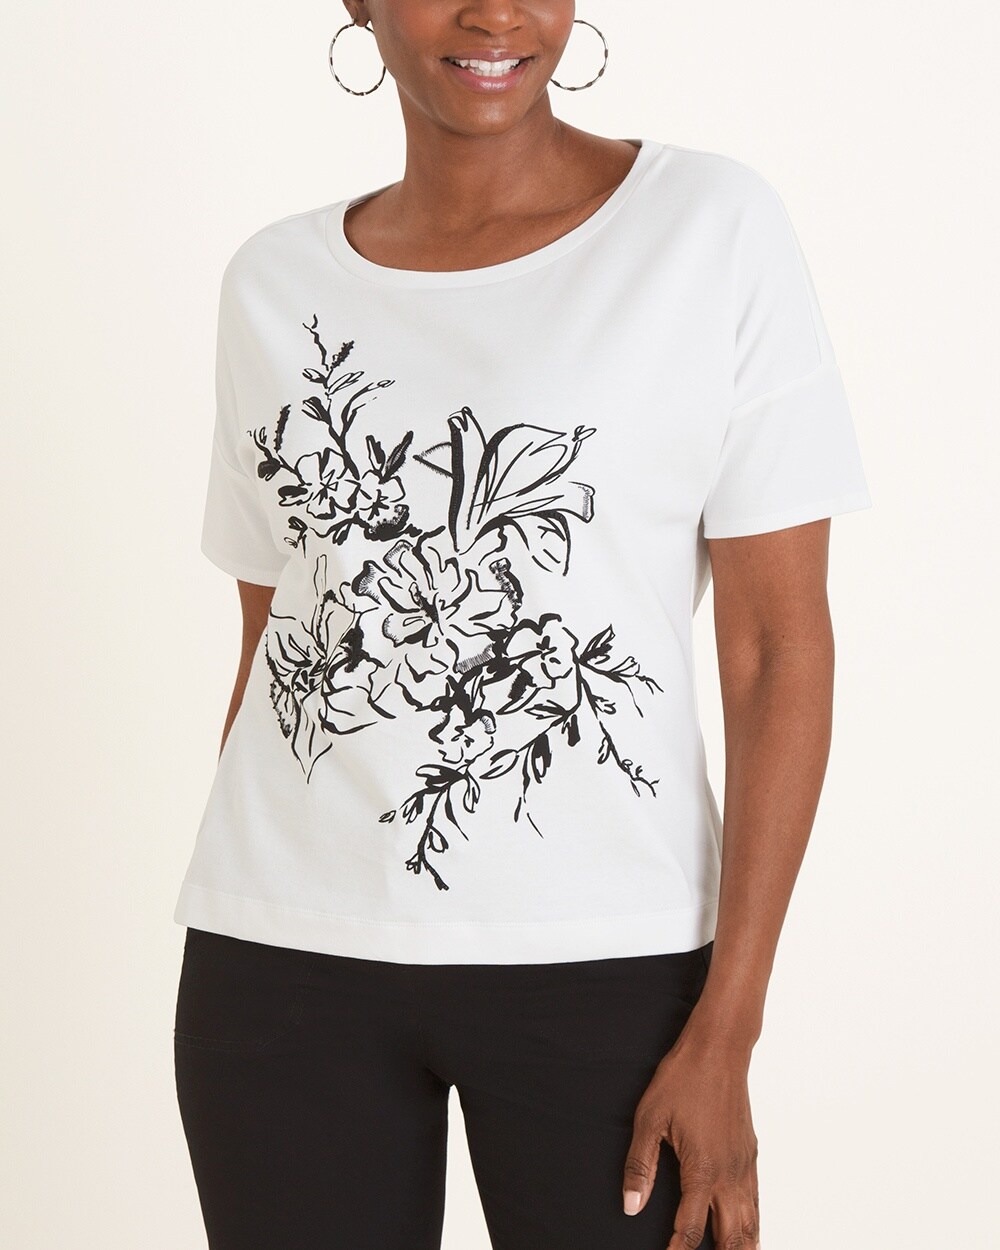 Black and White Floral Tee